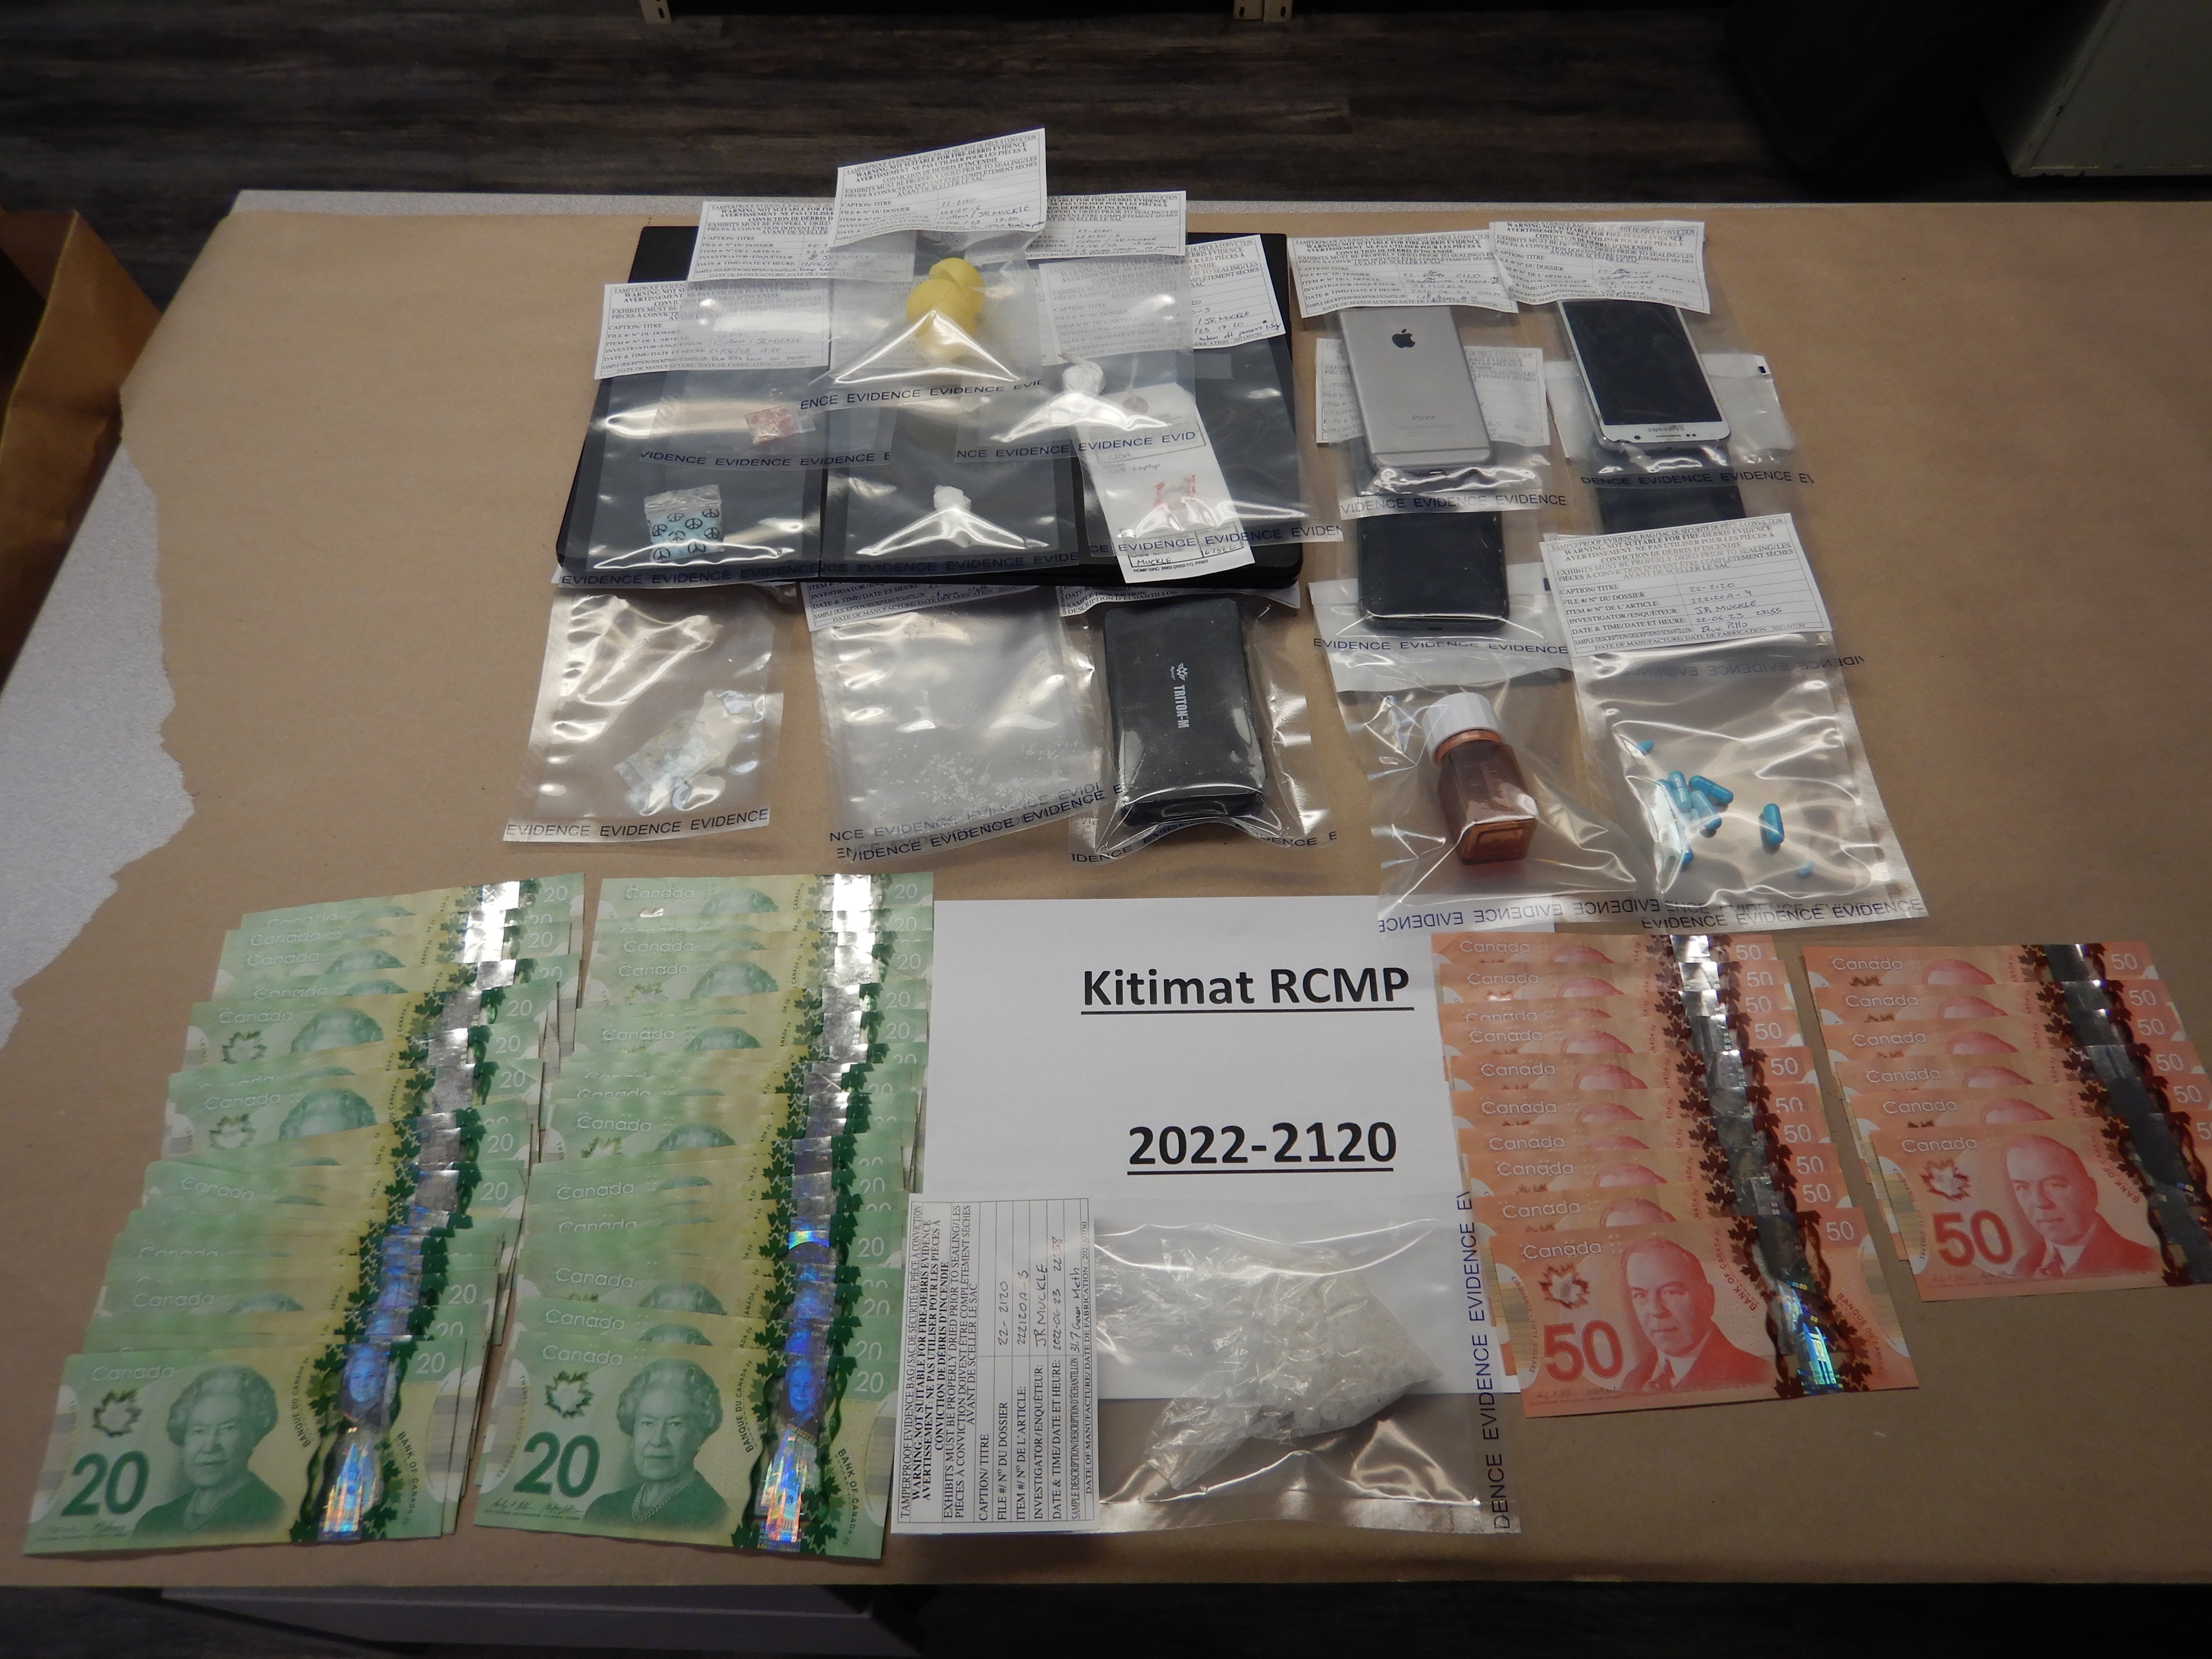 Photo of cash, phones and plastic bags with drugs. Text reads Kitimat RCMP 2022-2120